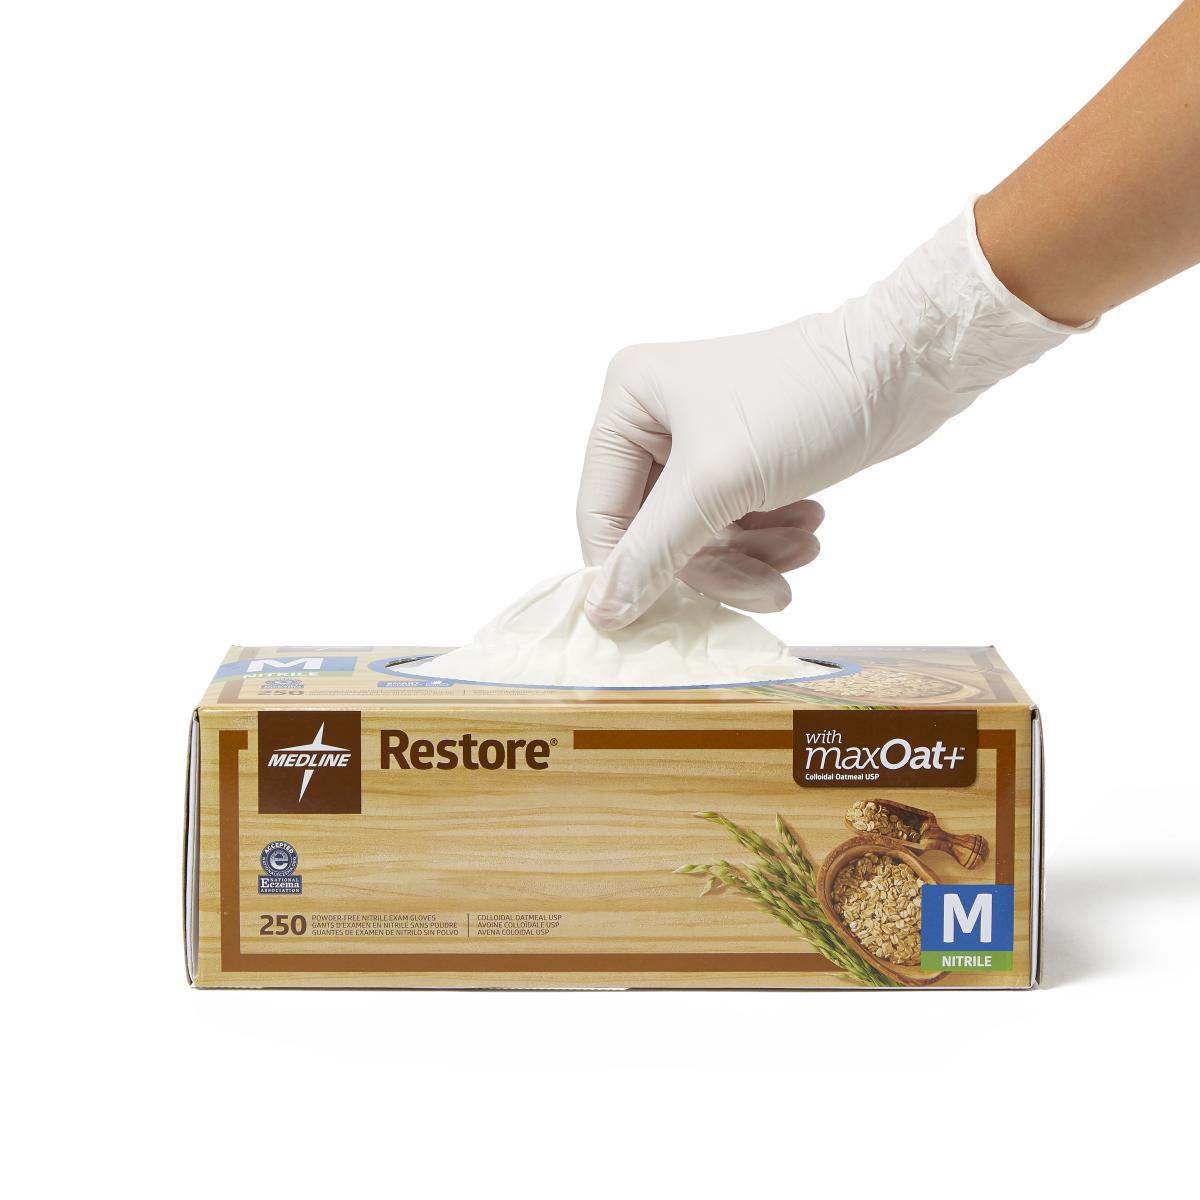 Restore Powder-Free Nitrile Exam Gloves with Oatmeal